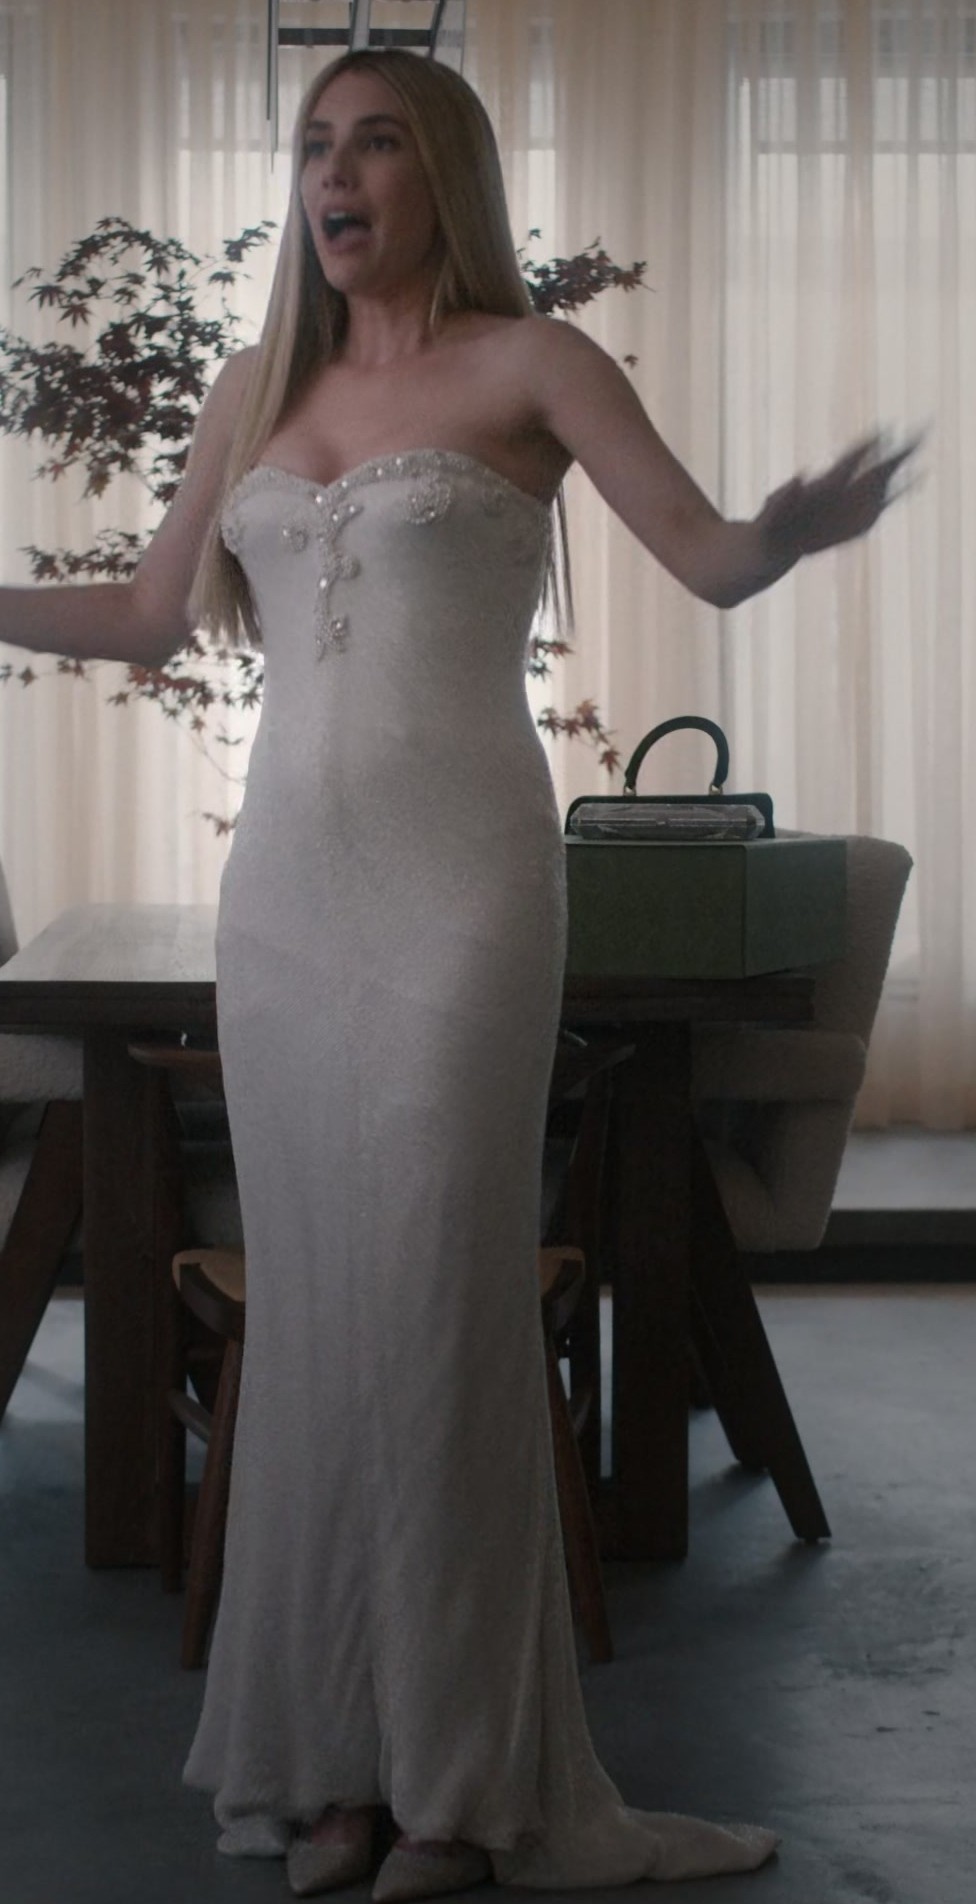 Worn on American Horror Story TV Show - Evening Strapless Maxi Dress Worn by Emma Roberts as Anna Victoria Alcott